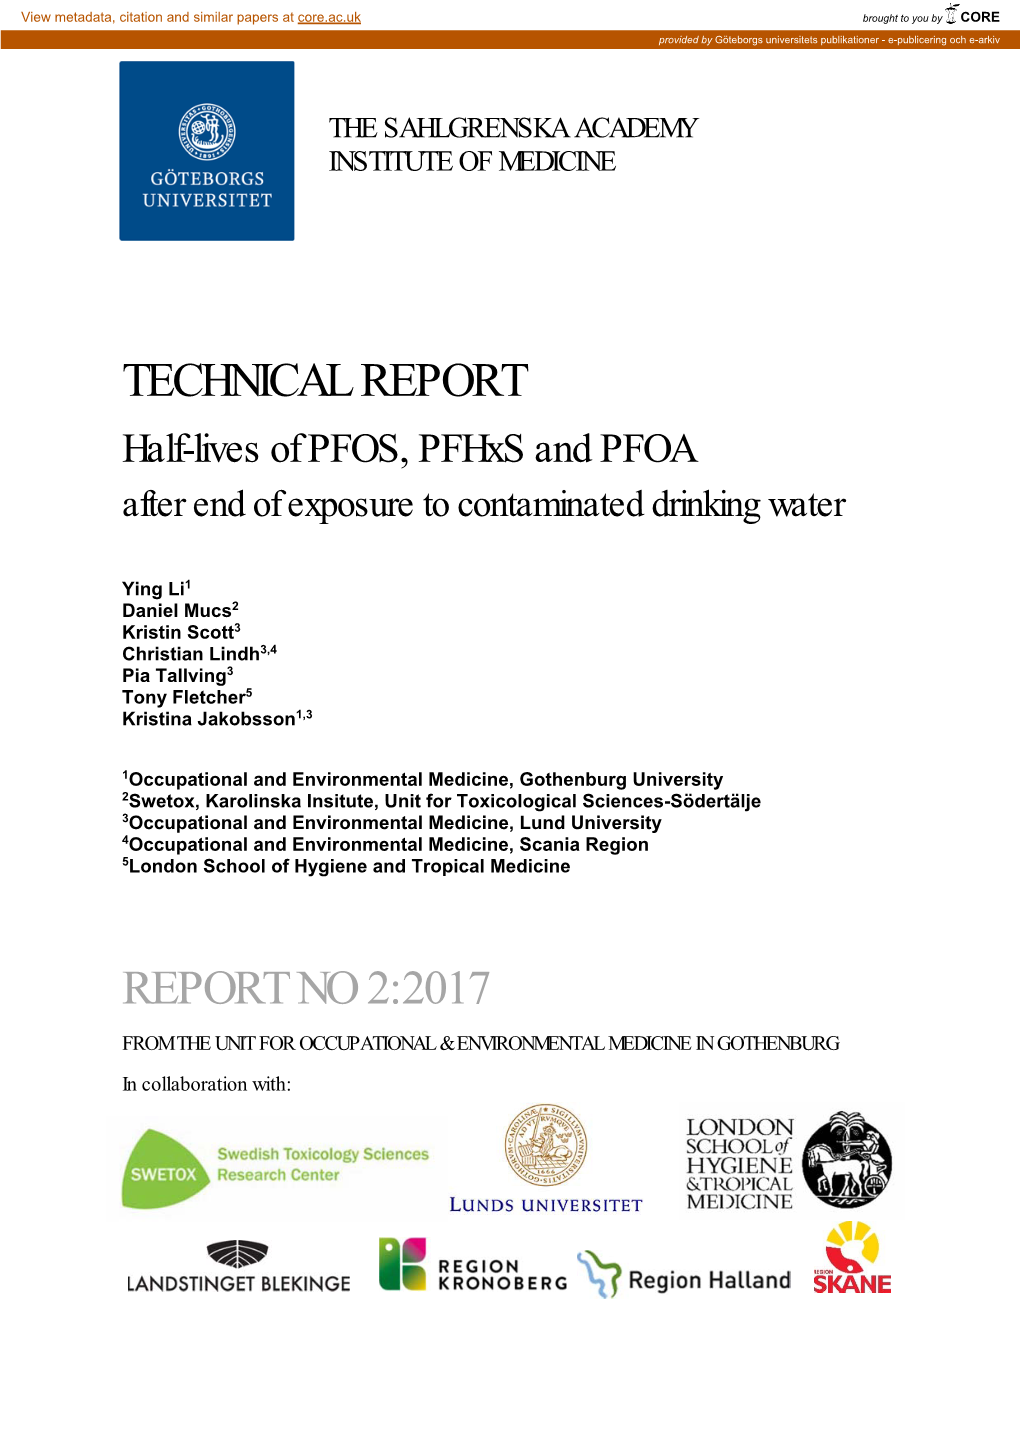 TECHNICAL REPORT Half-Lives of PFOS, Pfhxs and PFOA After End of Exposure to Contaminated Drinking Water